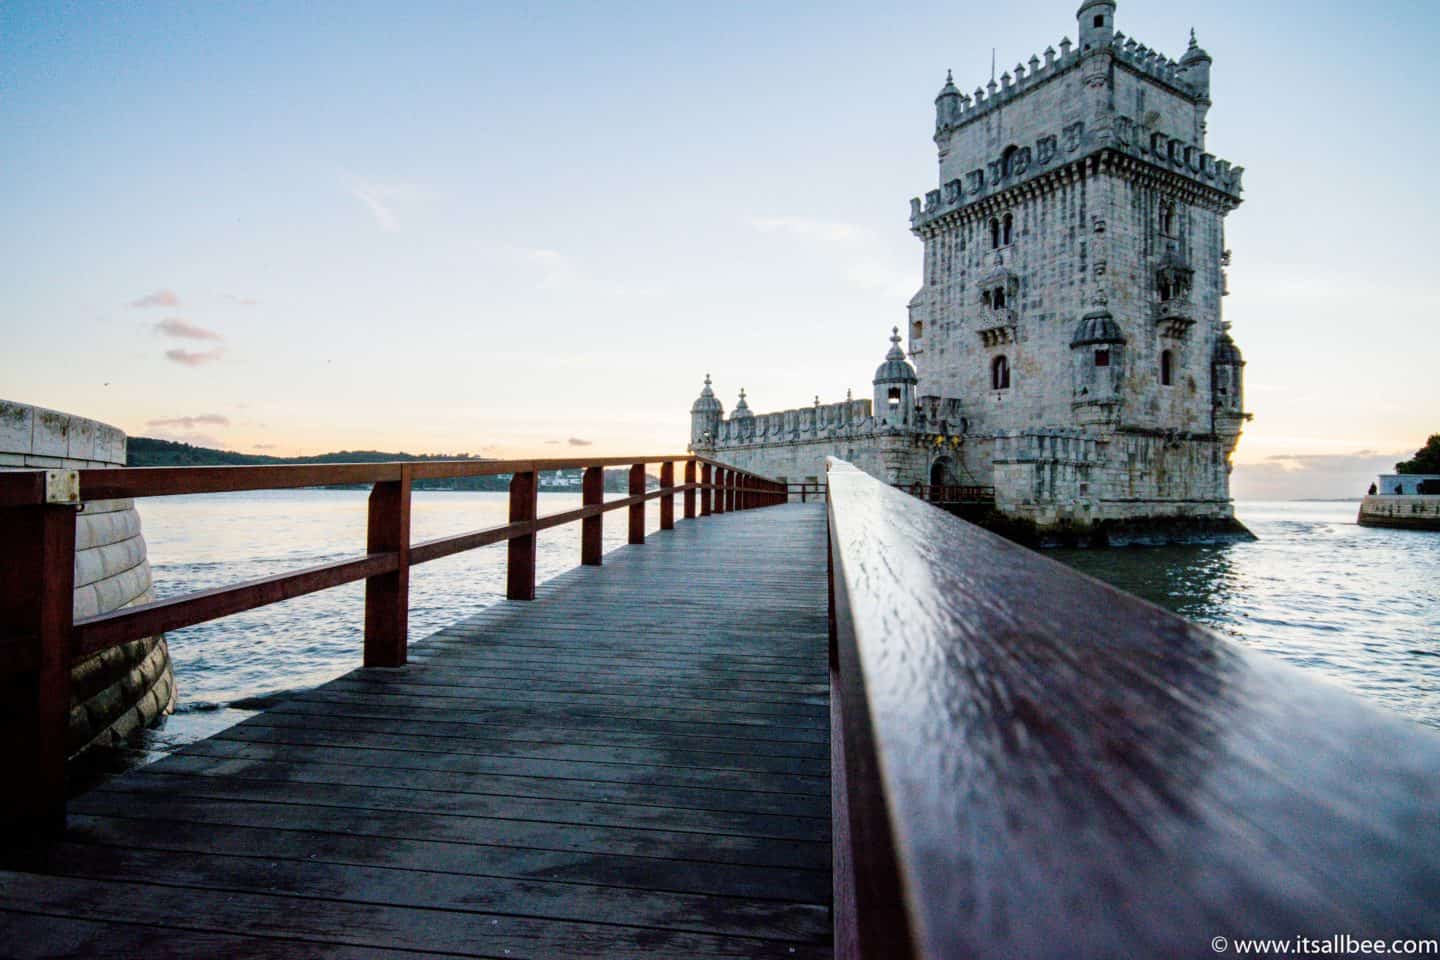 A Guide To Belem In Lisbon Portugal | Things To Do In Belem Lisbon #traveltips #guide #europe #citybreak #packing #outfits #itsallbee